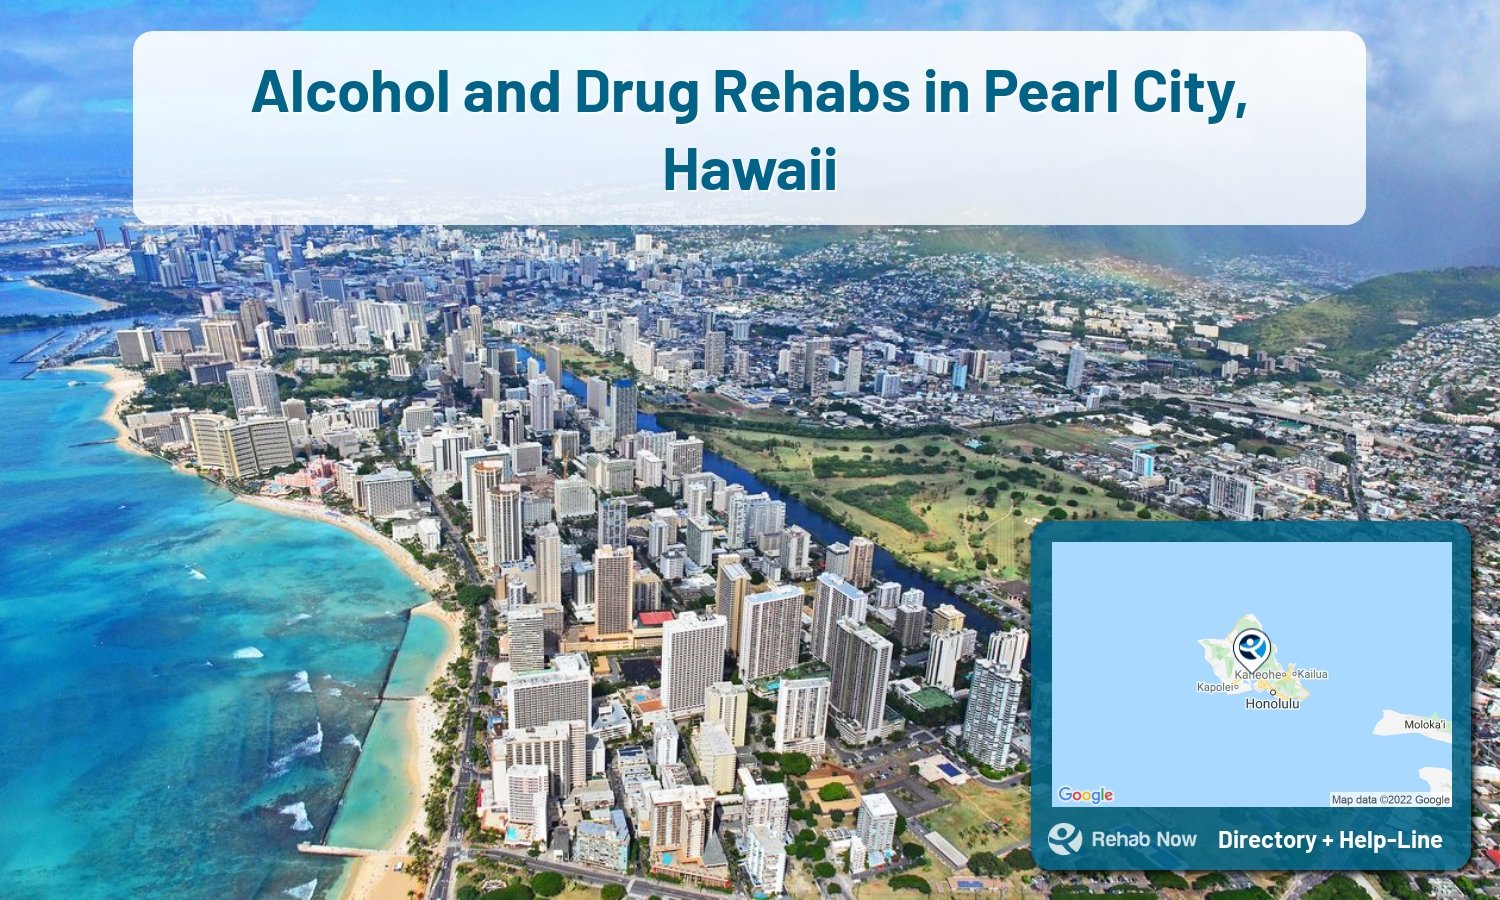 View options, availability, treatment methods, and more, for drug rehab and alcohol treatment in Pearl City, Hawaii